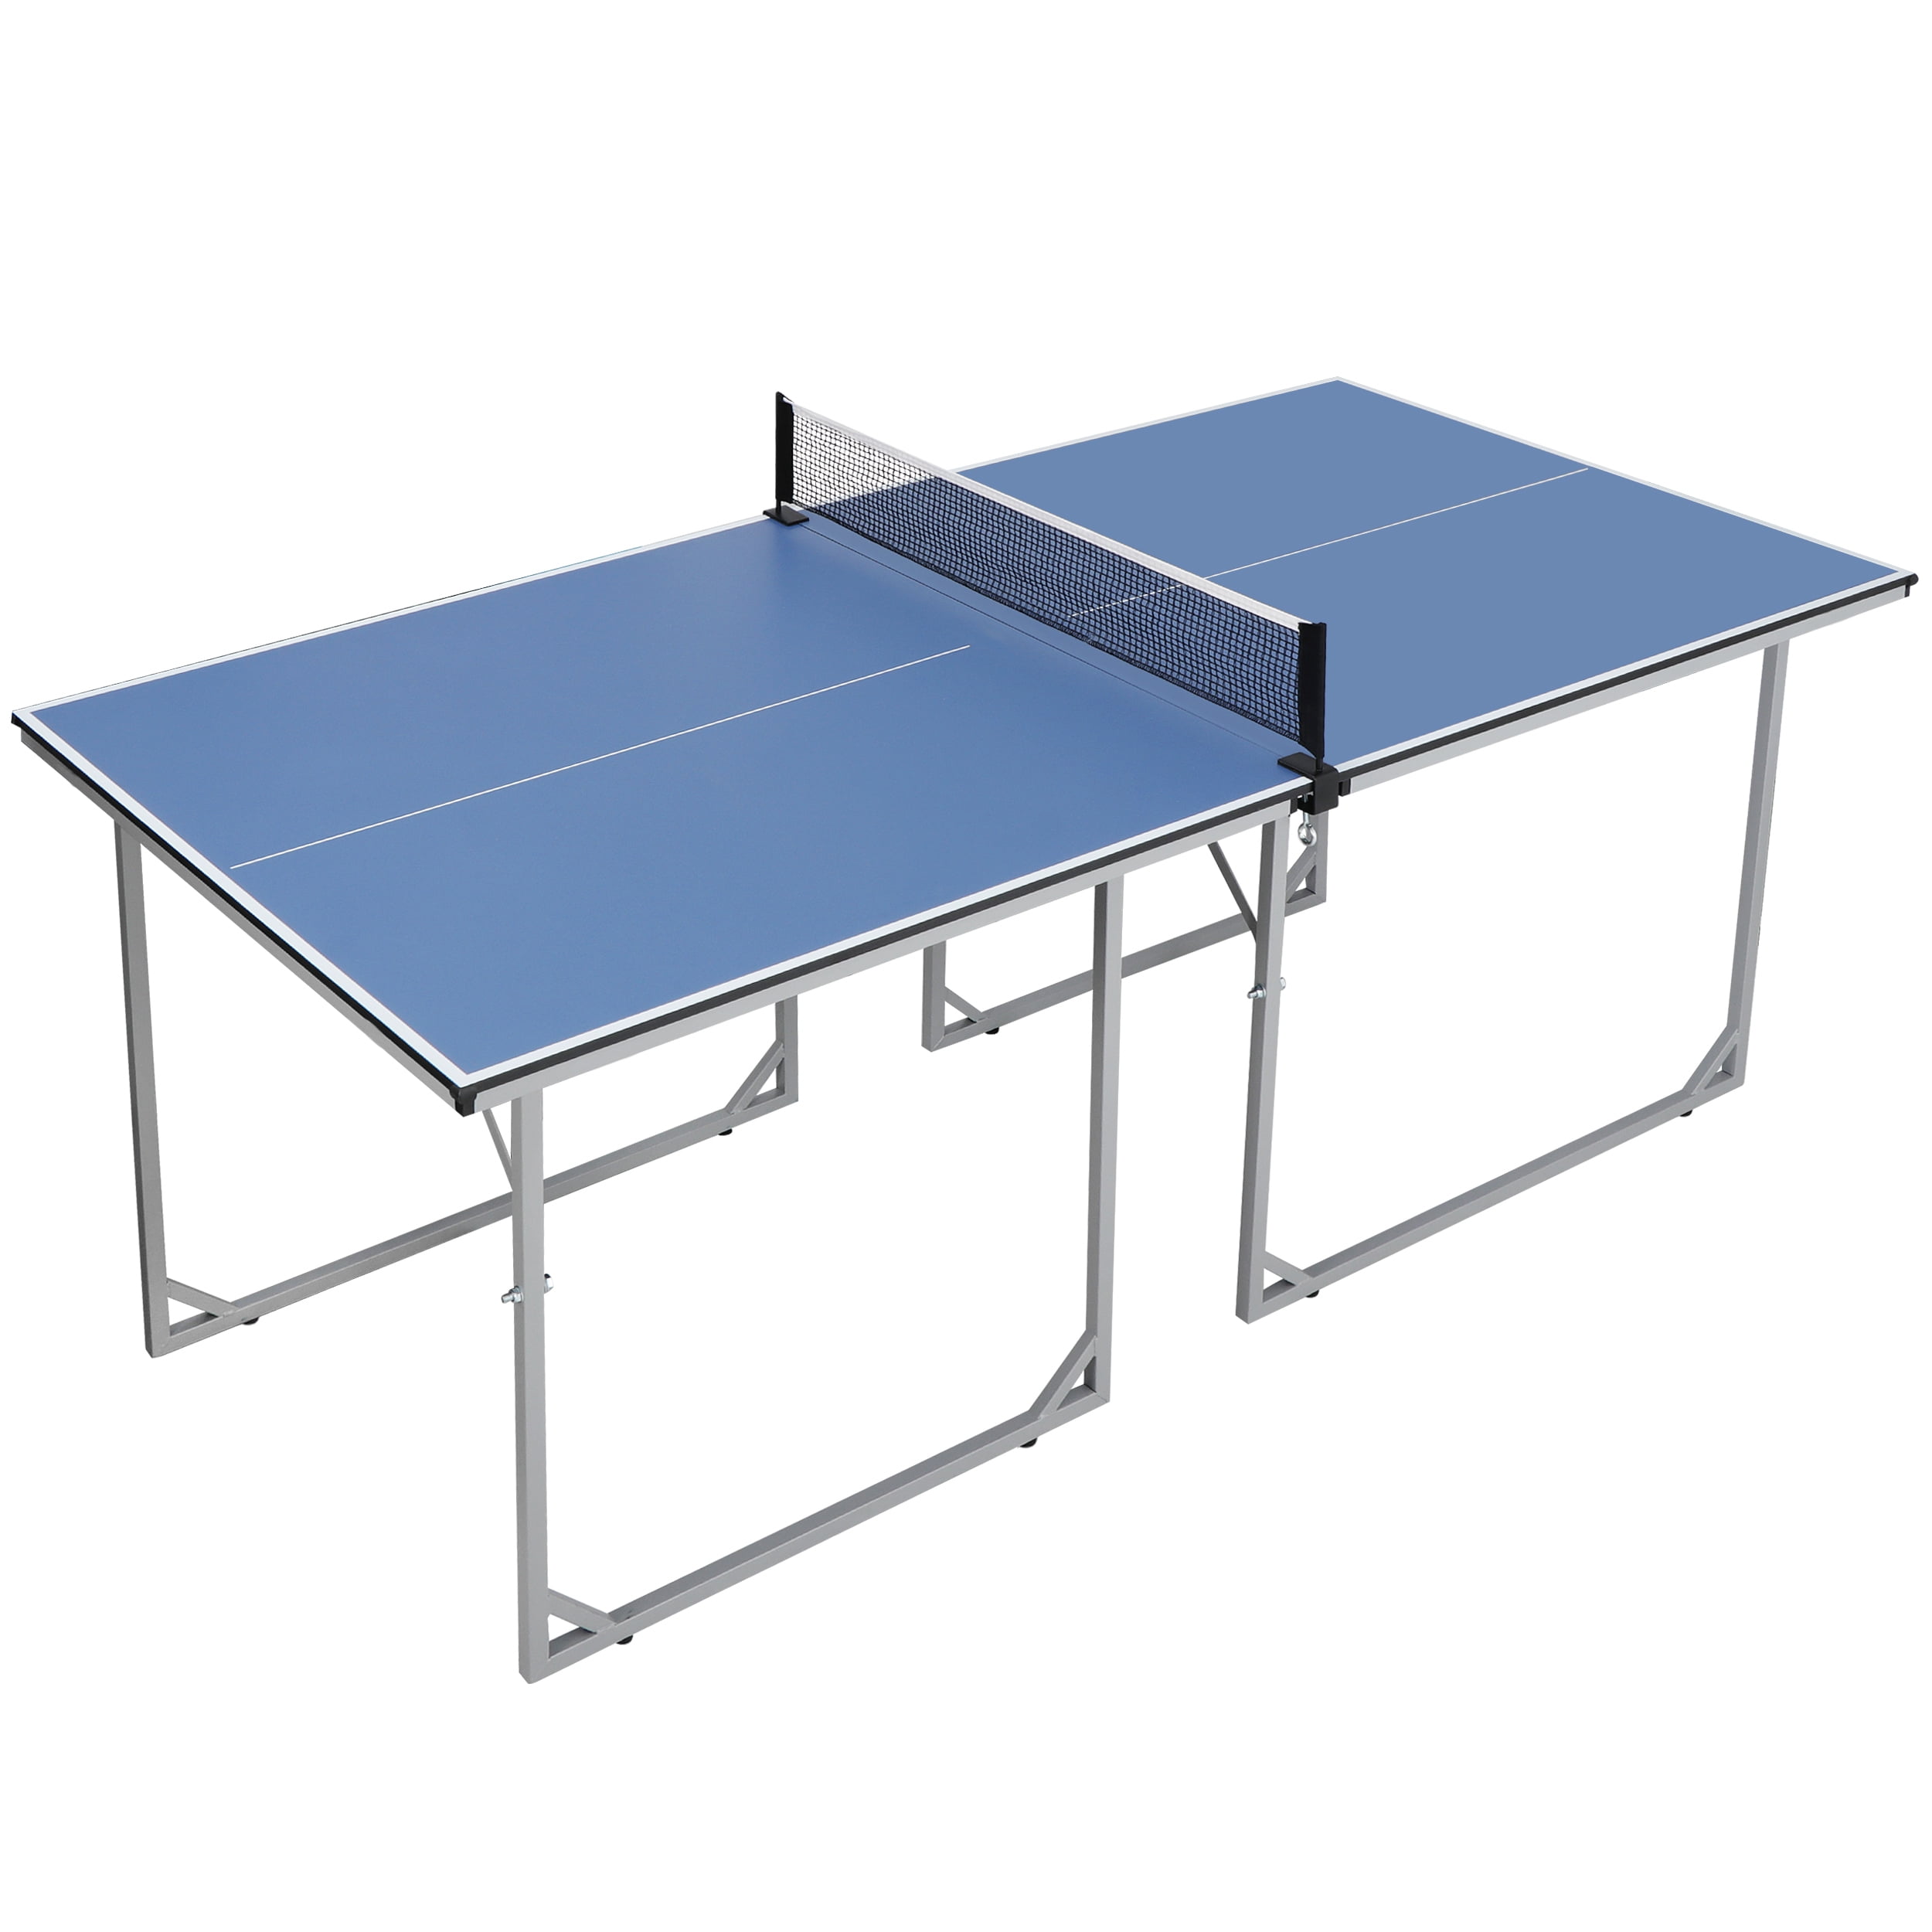 Segawe Indoor Outdoor Table Tennis, Diy Outdoor Folding Ping Pong Table Plans